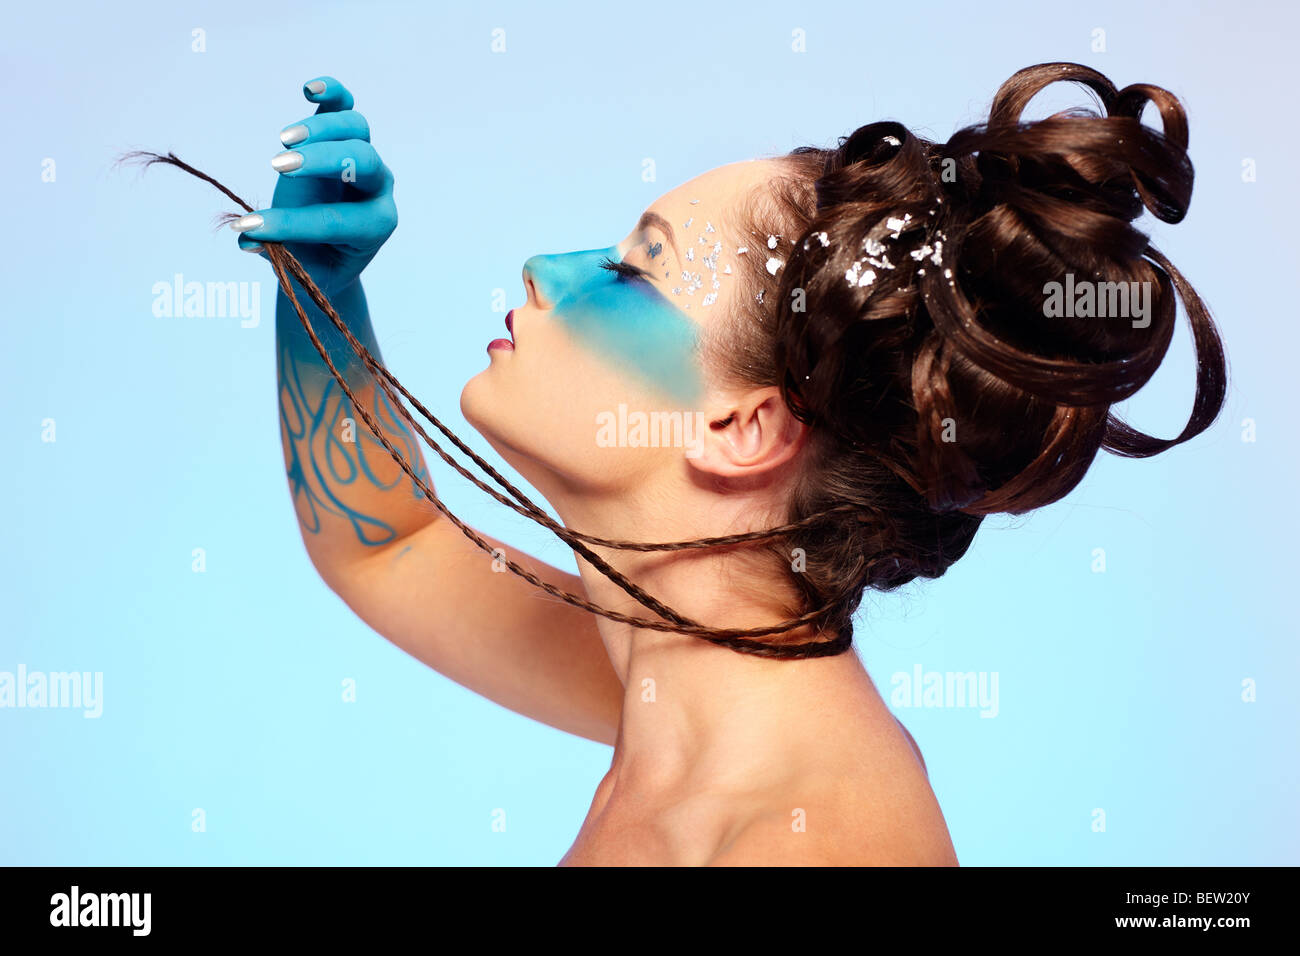 portrait of beautiful girl with blue stripe facial bodyart and fantasy hair-do pilling her several thin long braids Stock Photo